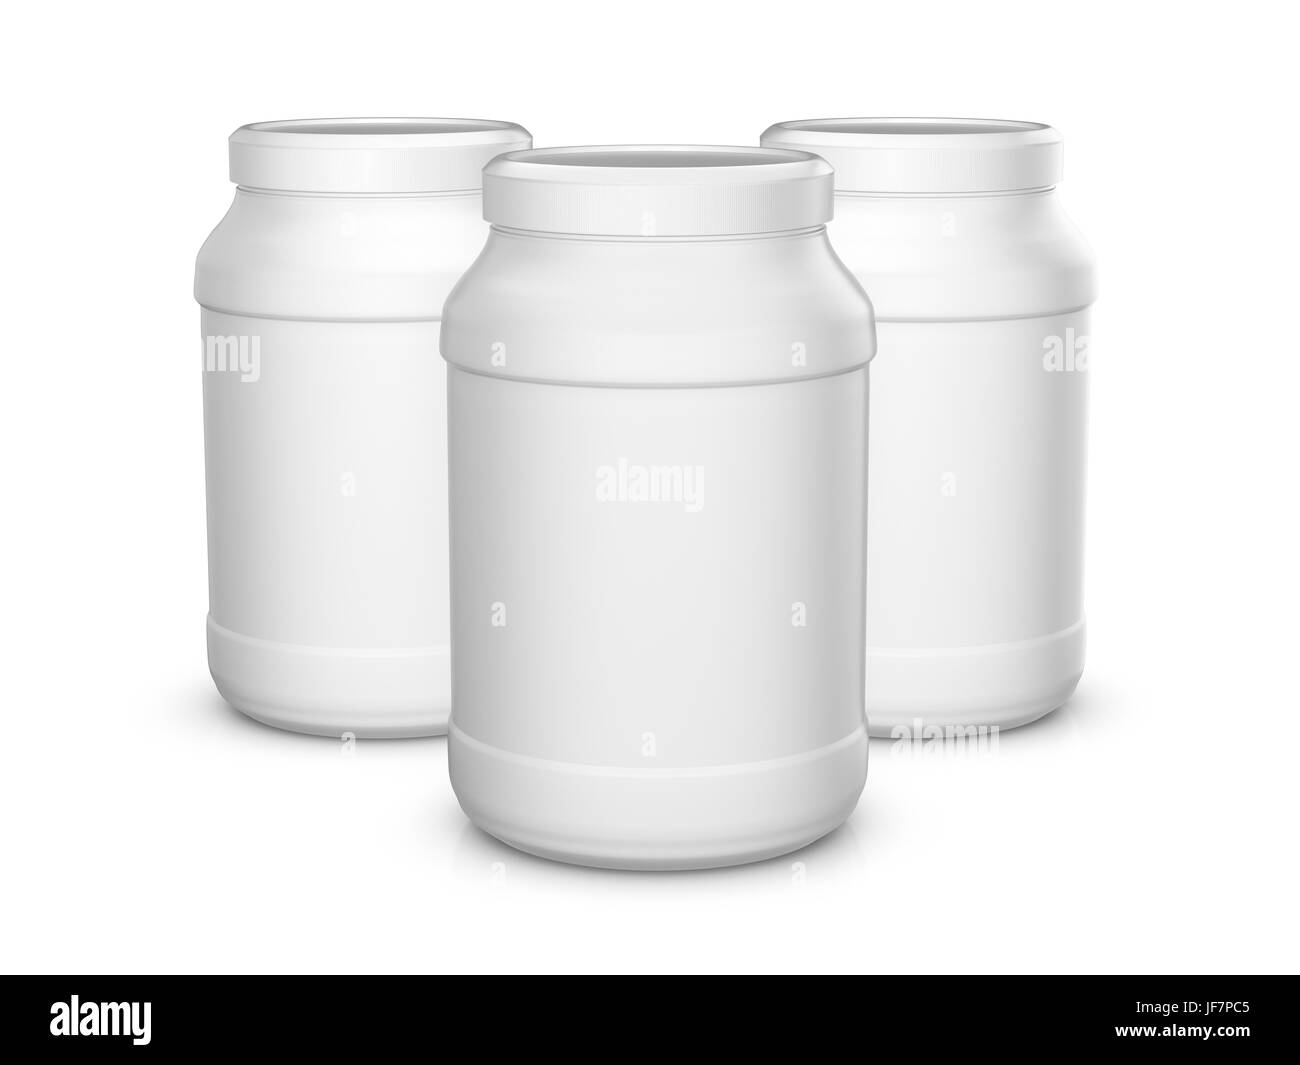 https://c8.alamy.com/comp/JF7PC5/whey-protein-container-on-a-white-background-3d-illustration-JF7PC5.jpg